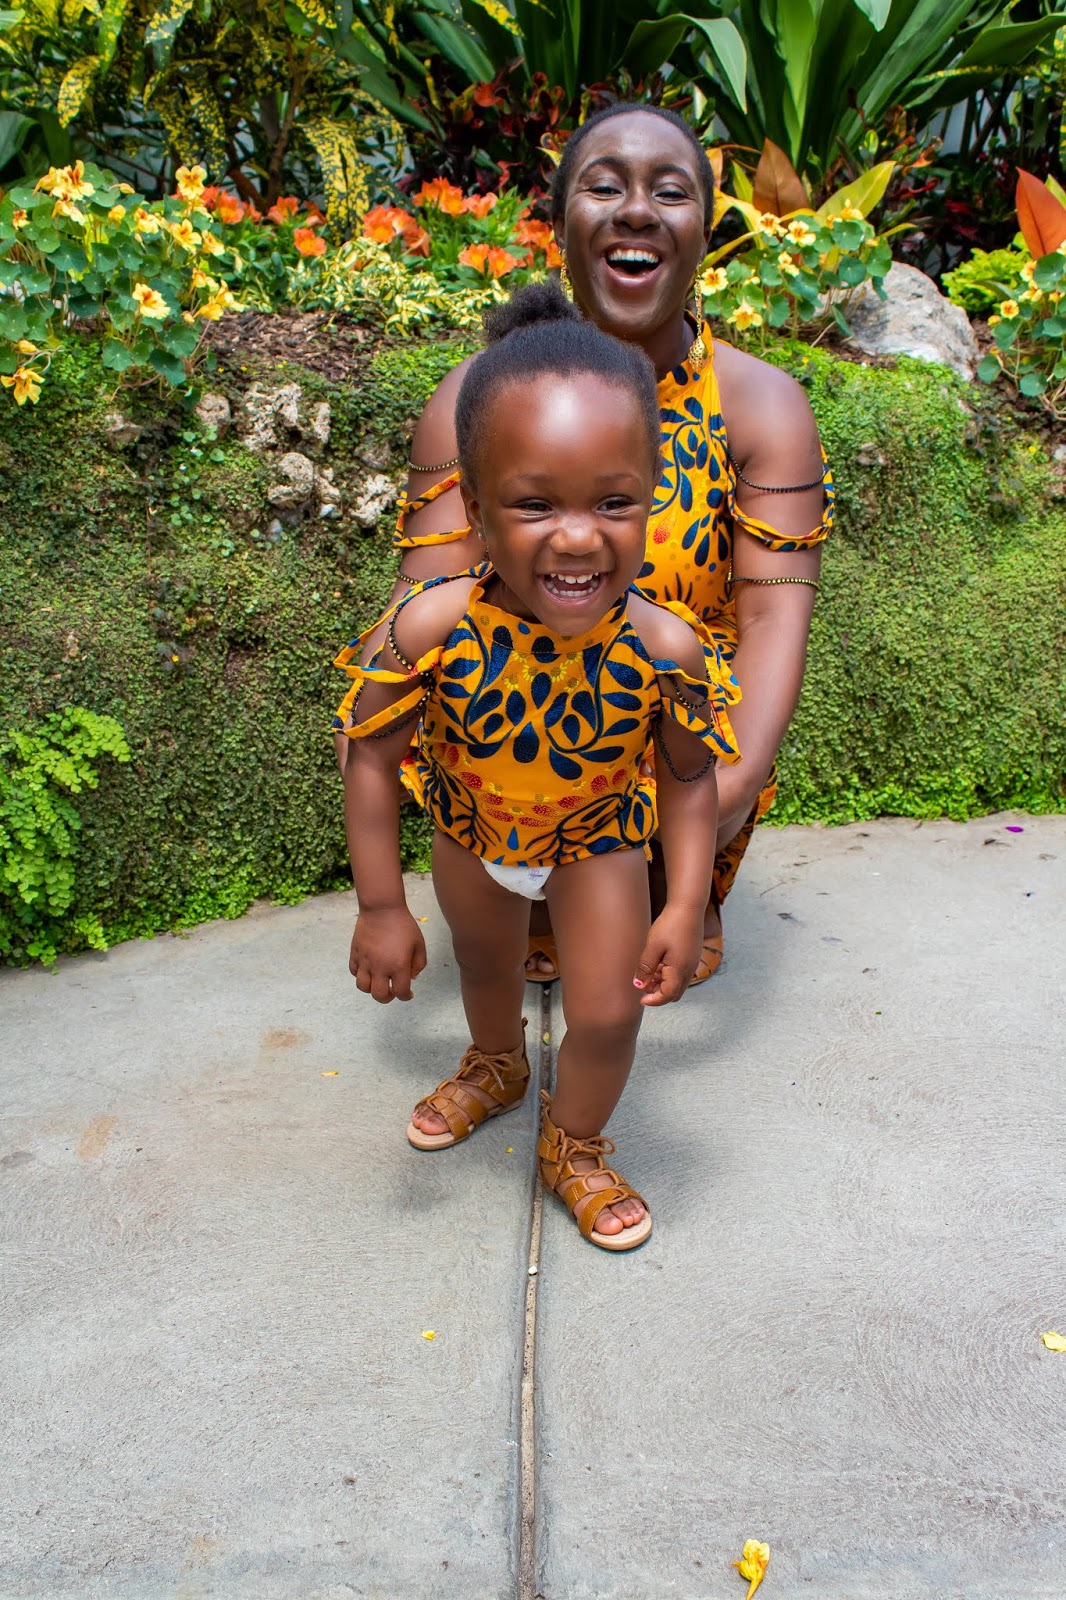 mummy and me ankara, mother and daughter ankara outfits,  african outfits for family,  mother and daughter african attire,  mother and daughter matching african outfits,  mom and daughter matching ankara outfits,  mommy and me african dress,  mommy and me outfits,  mum and daughter ankara style, mummy and me style, mummy and me fashion, asoebi bella, asoebi baby, buy nigerian